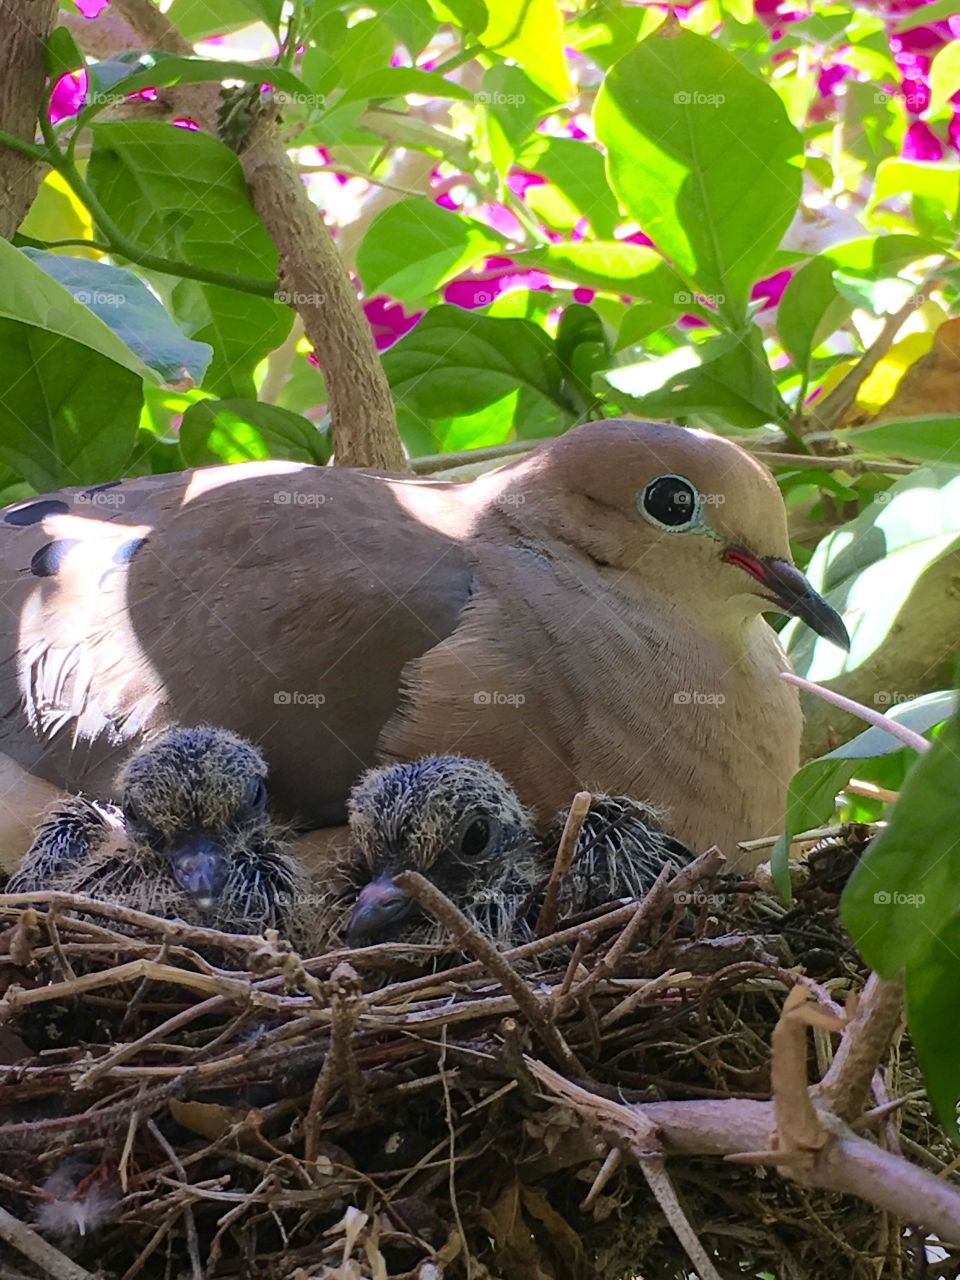 Momma bird with hatchlings